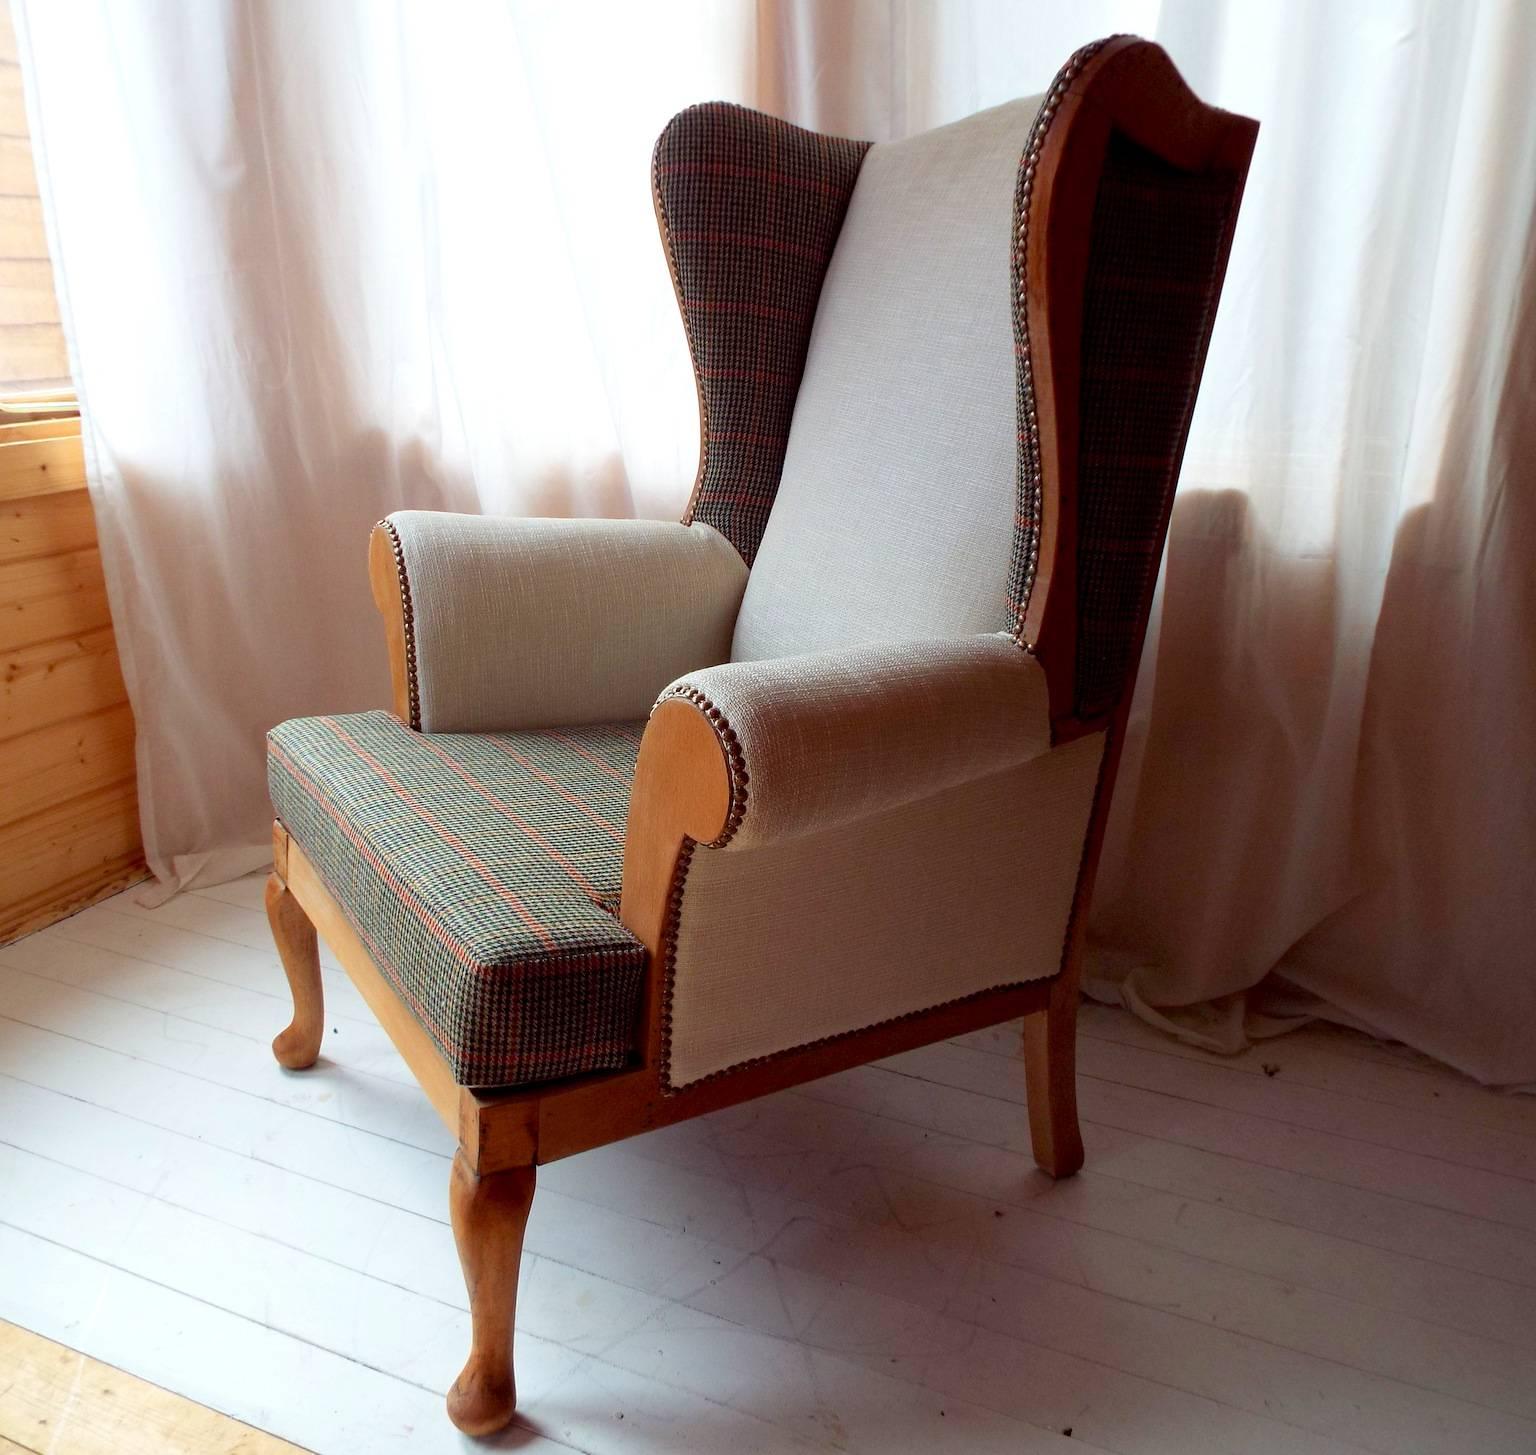 100% wool panels, exposed frame, refinished woodwork and top quality fabric, make this 1950s wingback something special.

Birch and Alpe, furniture makers of High Wycombe, manufactured high quality furniture from the 1920s until 1959. This extremely